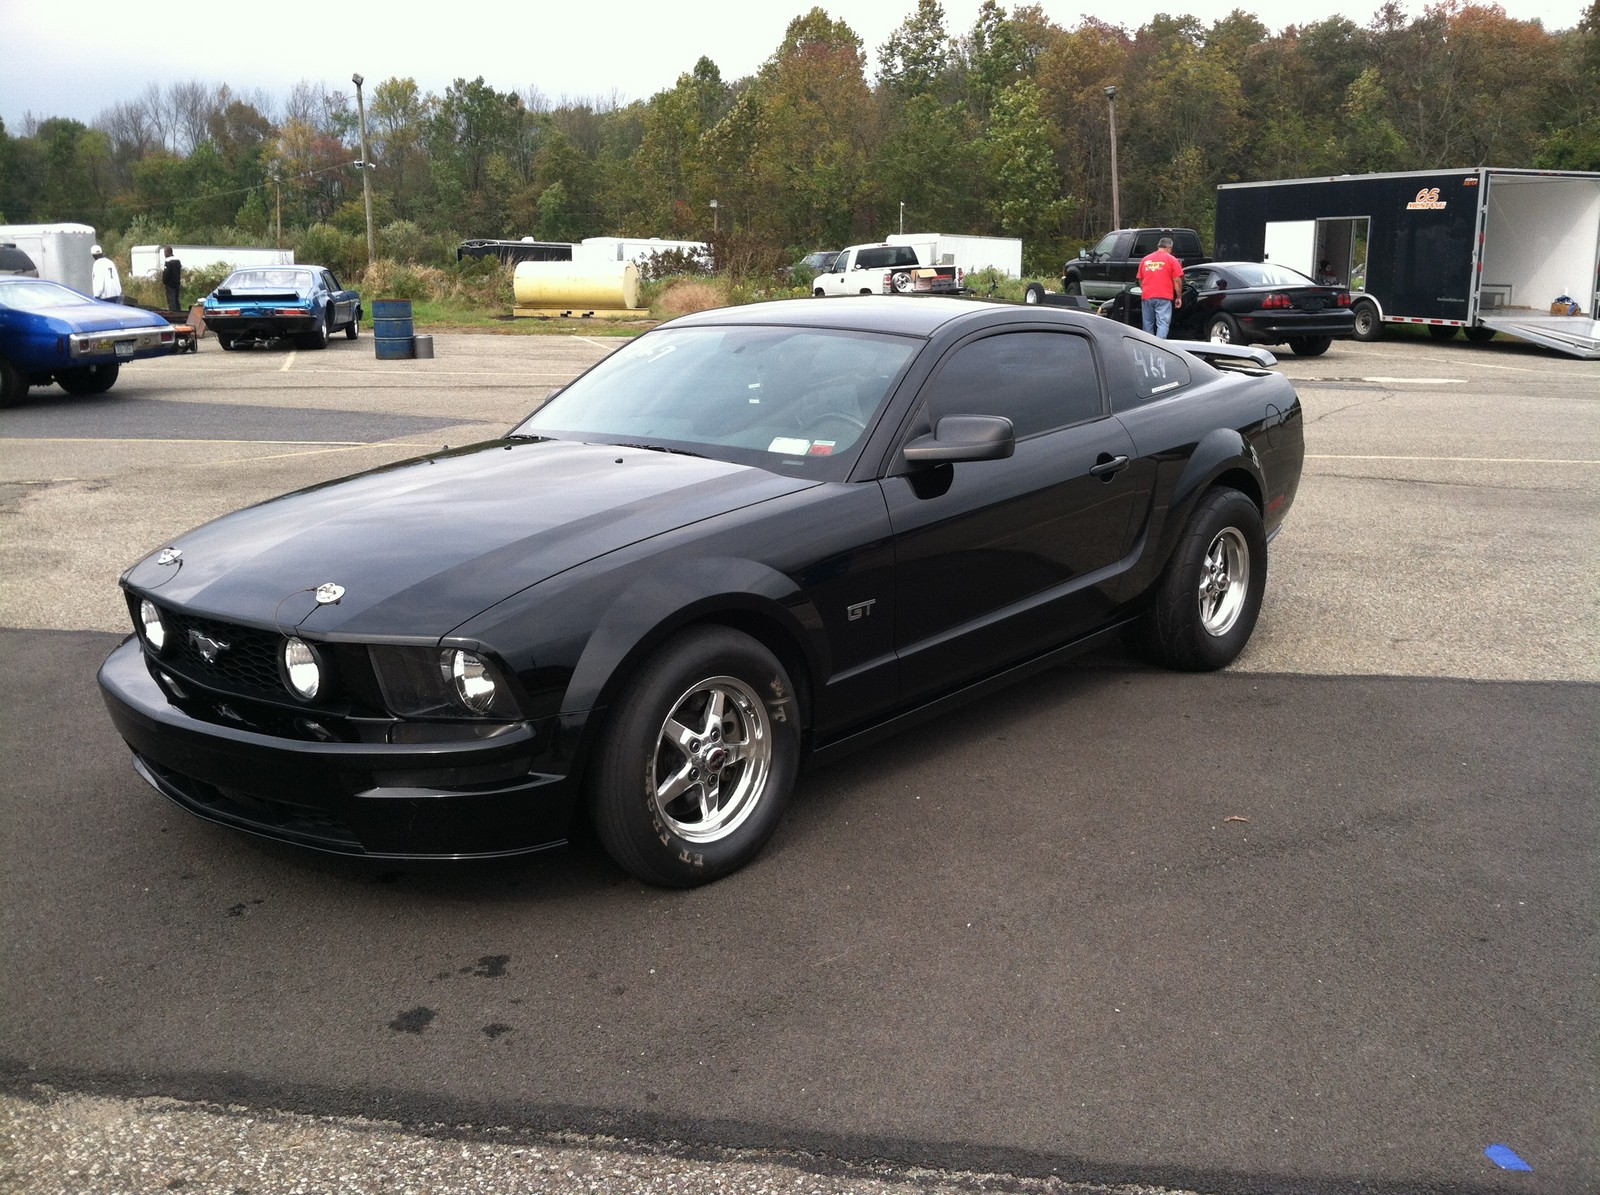 2006 Ford mustang gt 0-60 time